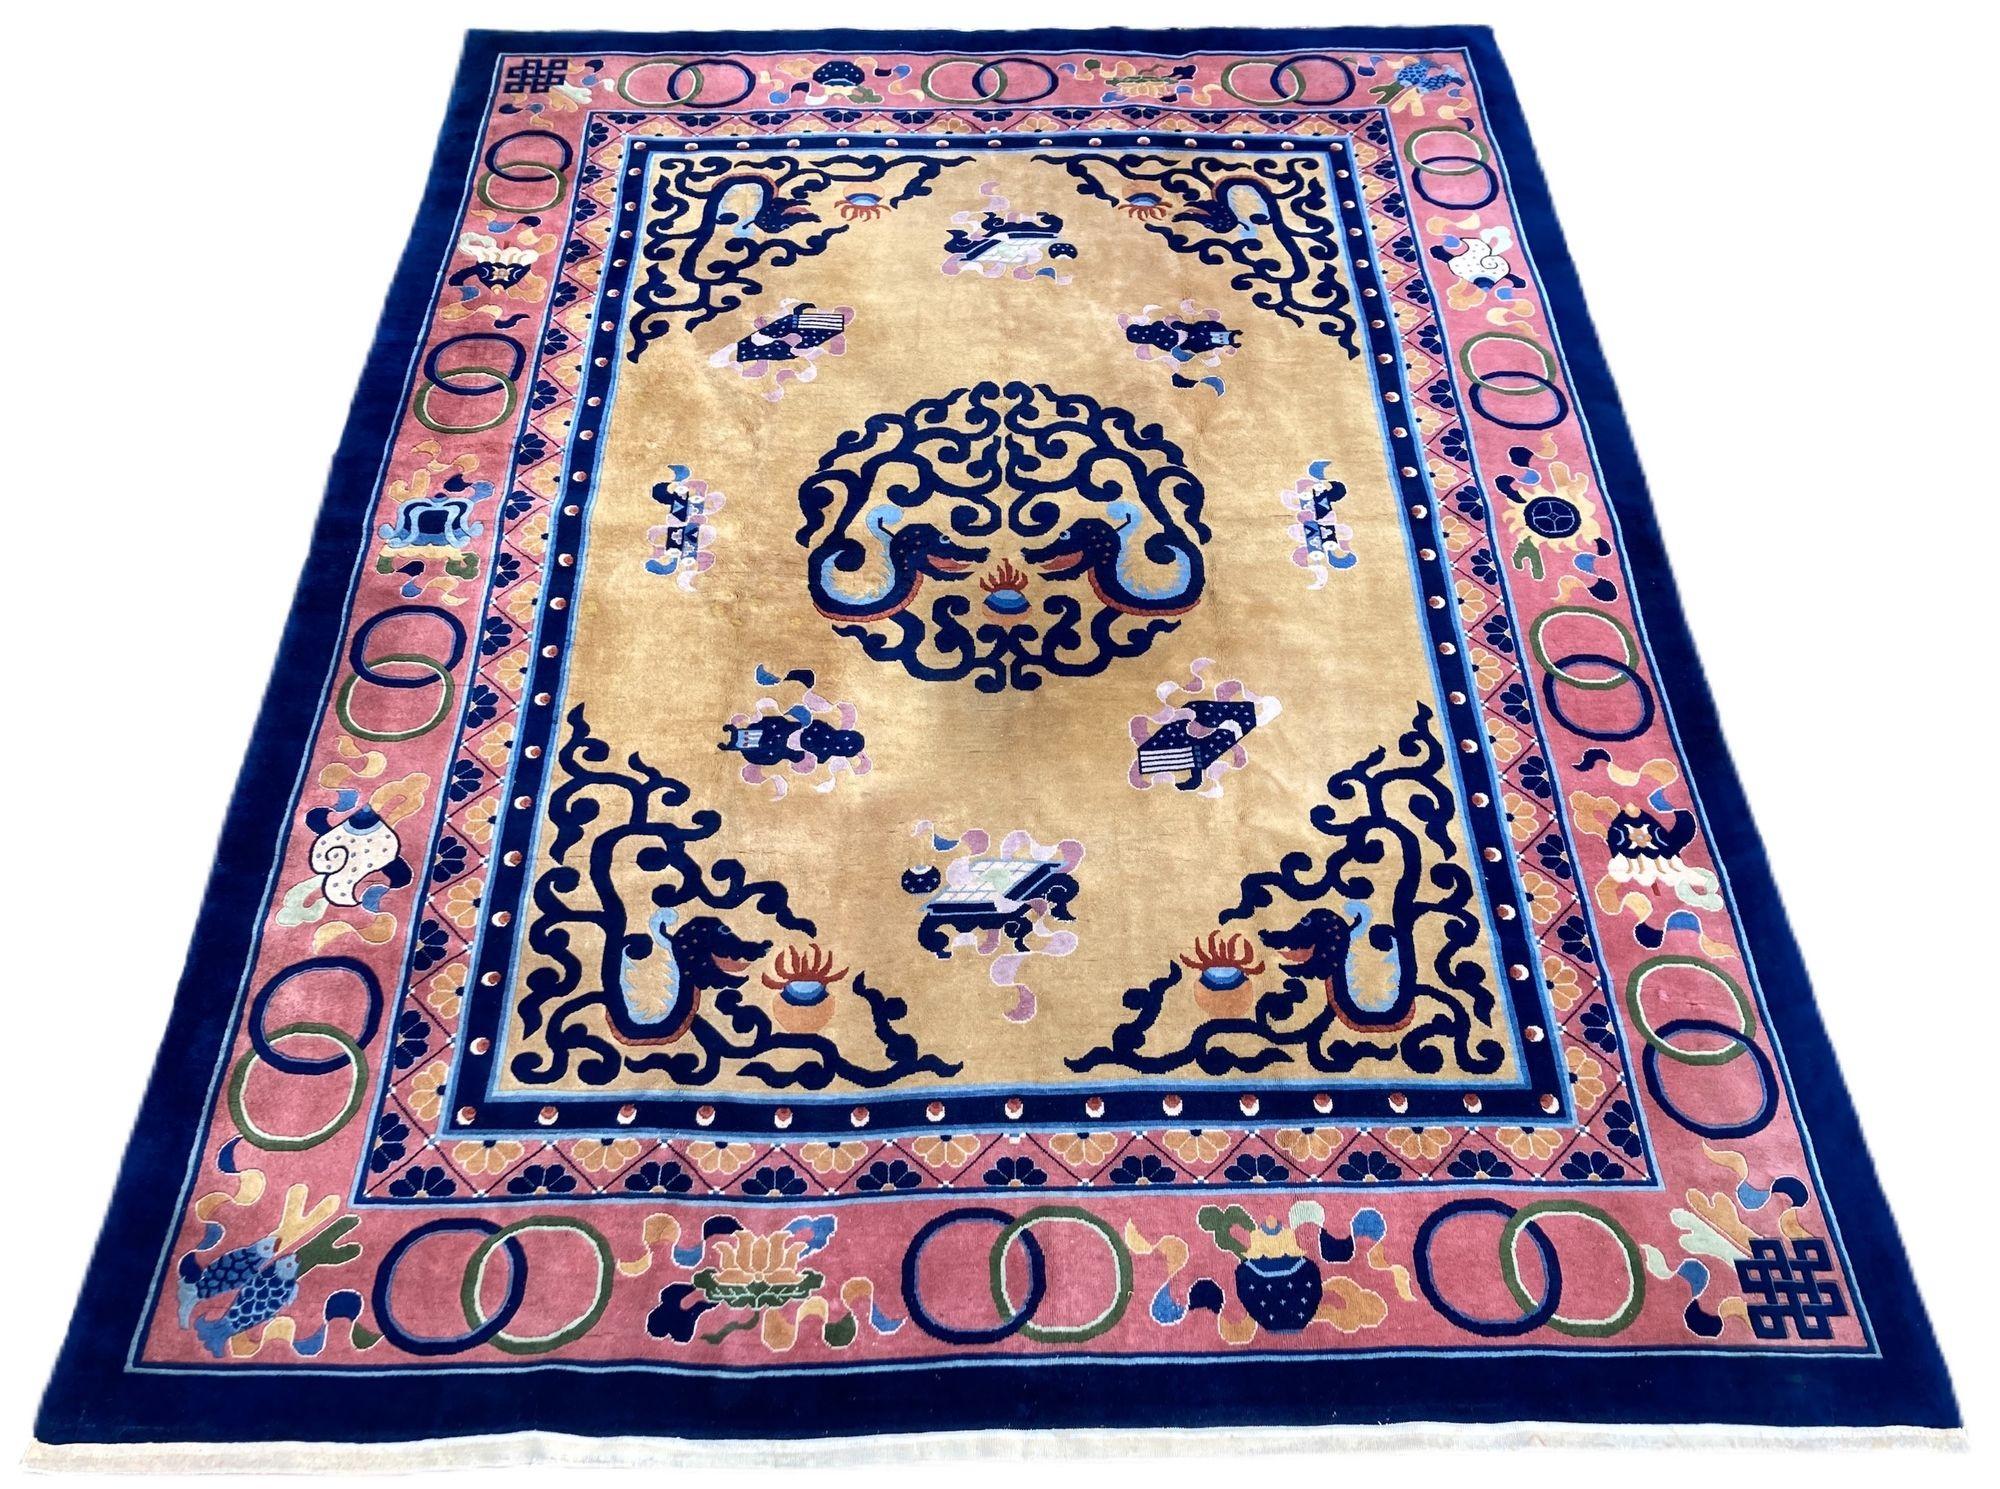 A lovely vintage Art Deco carpet, hand woven in China circa 1960 with a medallion of 2 duelling dragons surrounded by Buddhist symbols on a light gold field and salmon border. Note the dragons in the corner spandrels and the additional symbols in